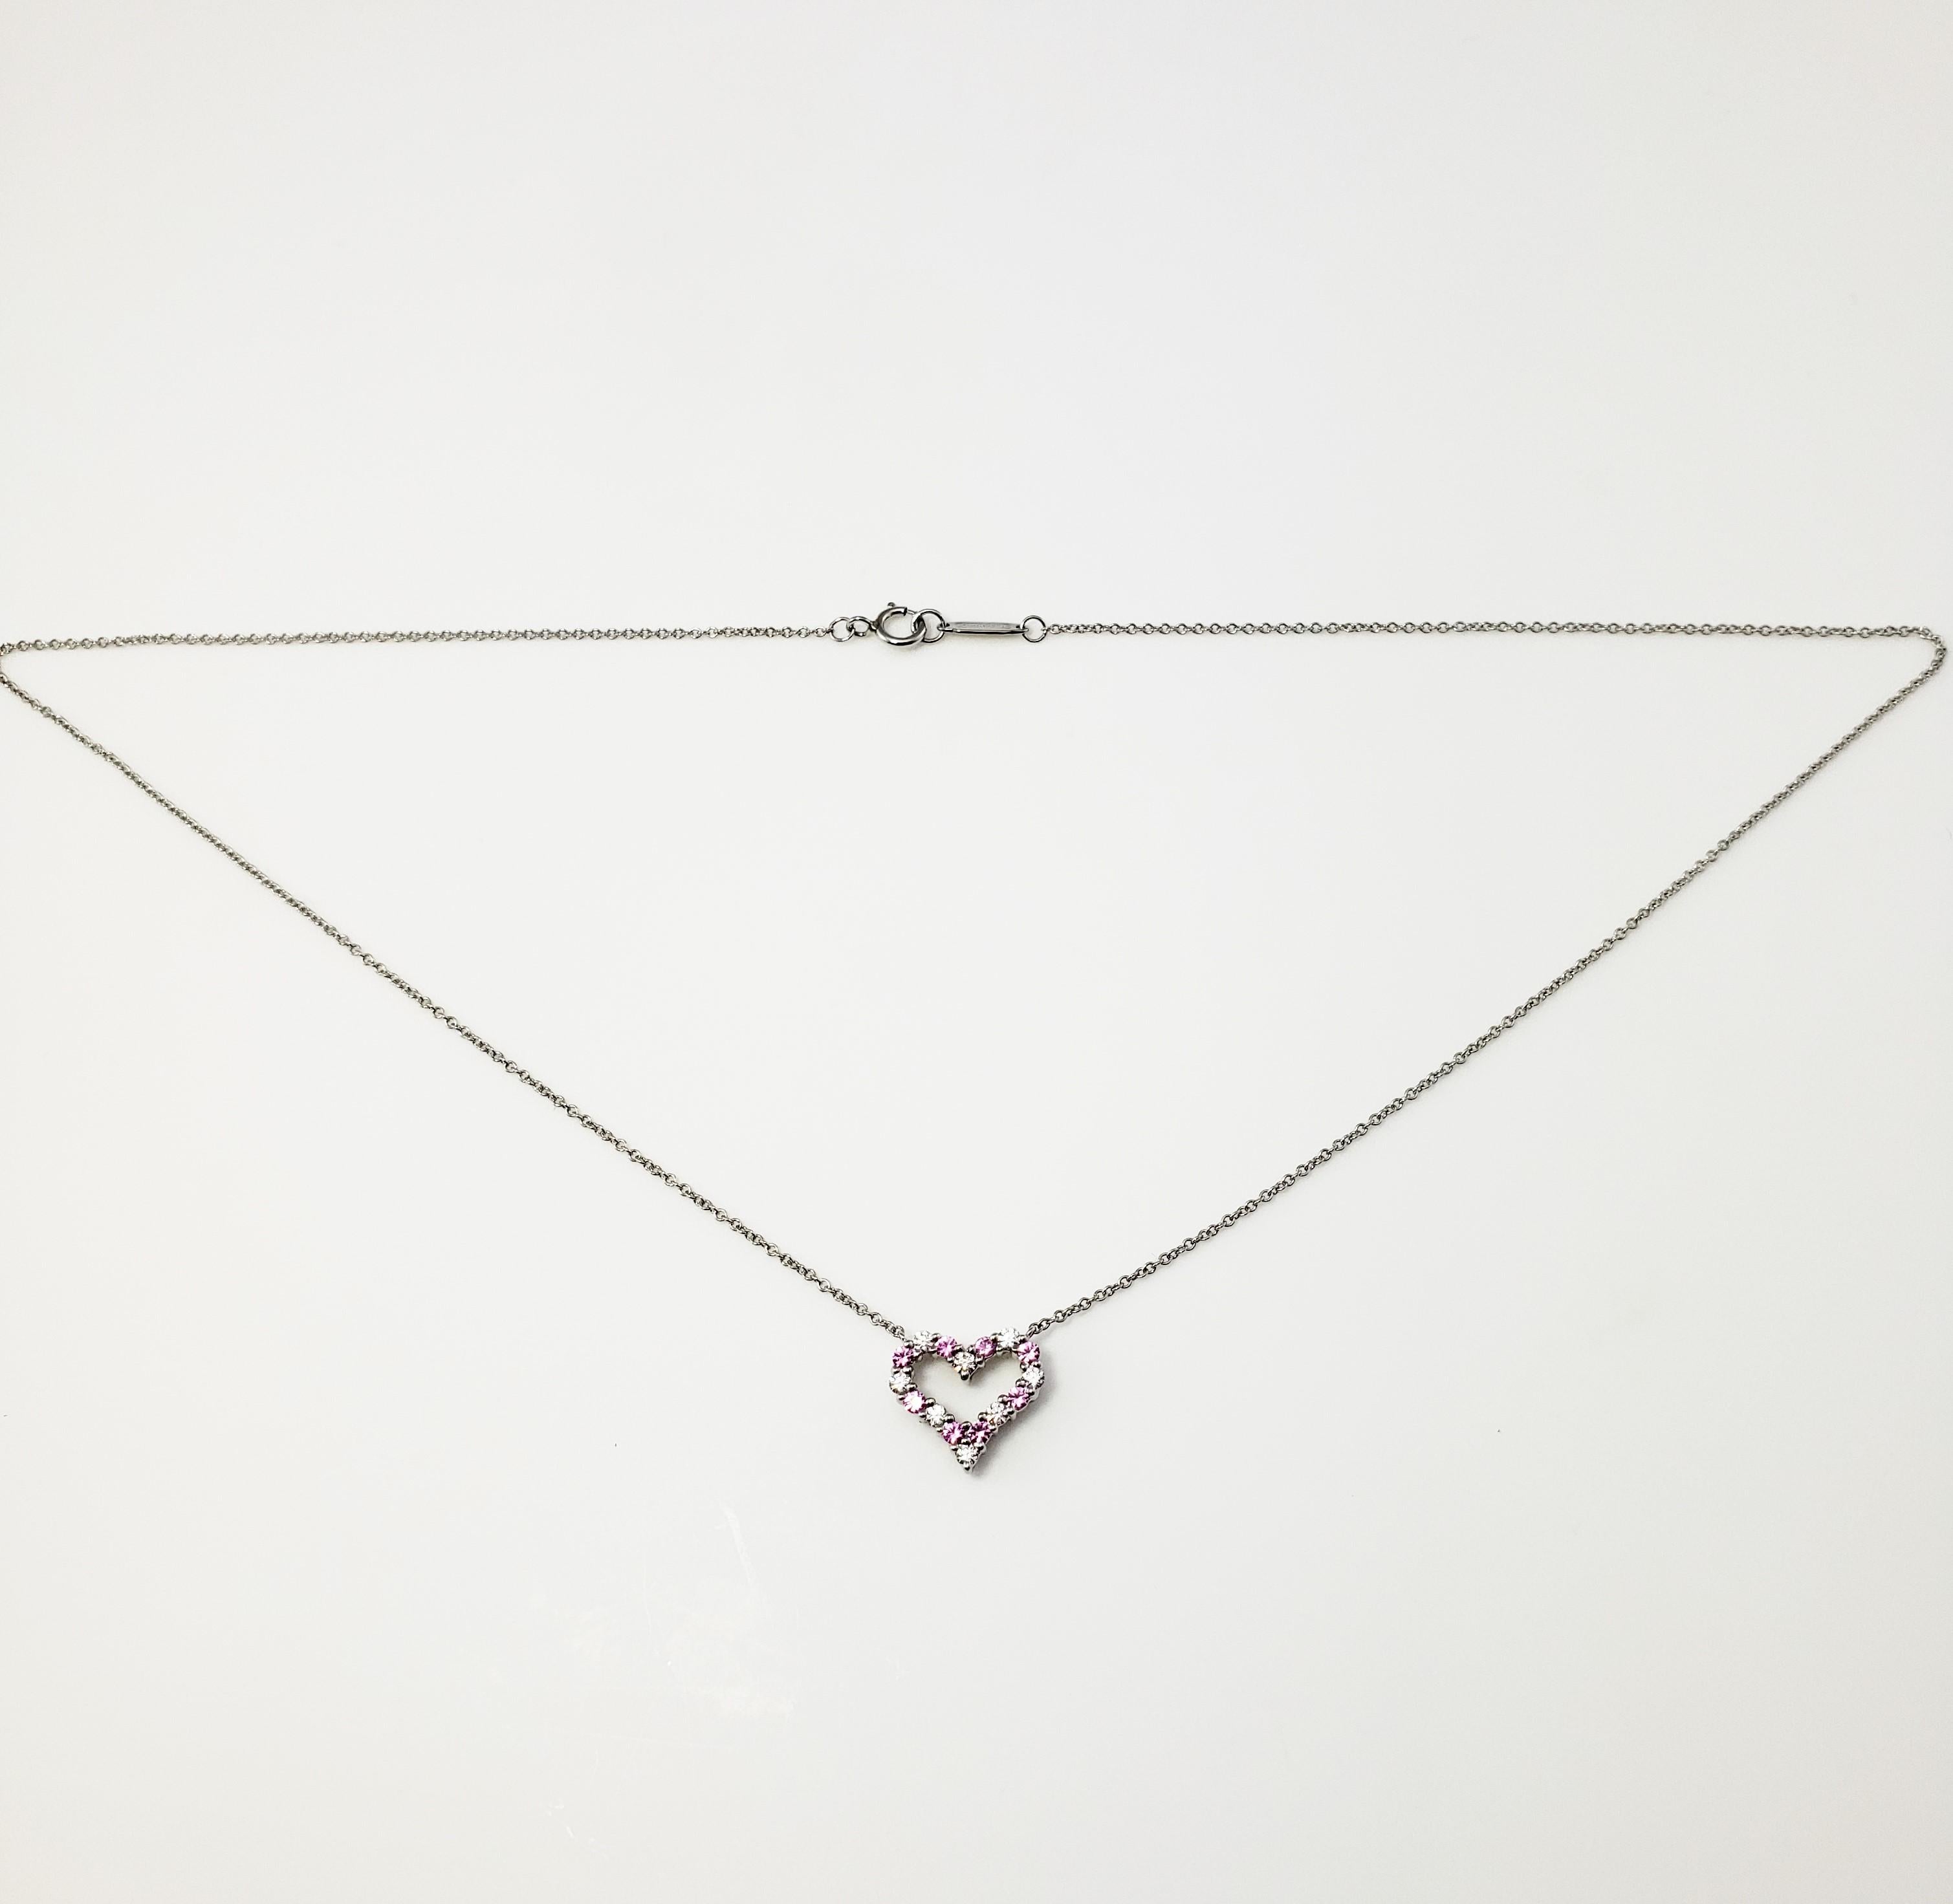 Vintage Tiffany and Co. Platinum Pink Sapphire and Diamond Heart Necklace-

This exquisite heart pendant features eight round brilliant cut diamonds and eight pink sapphires set in elegant platinum.

Approximate total diamond weight: .25